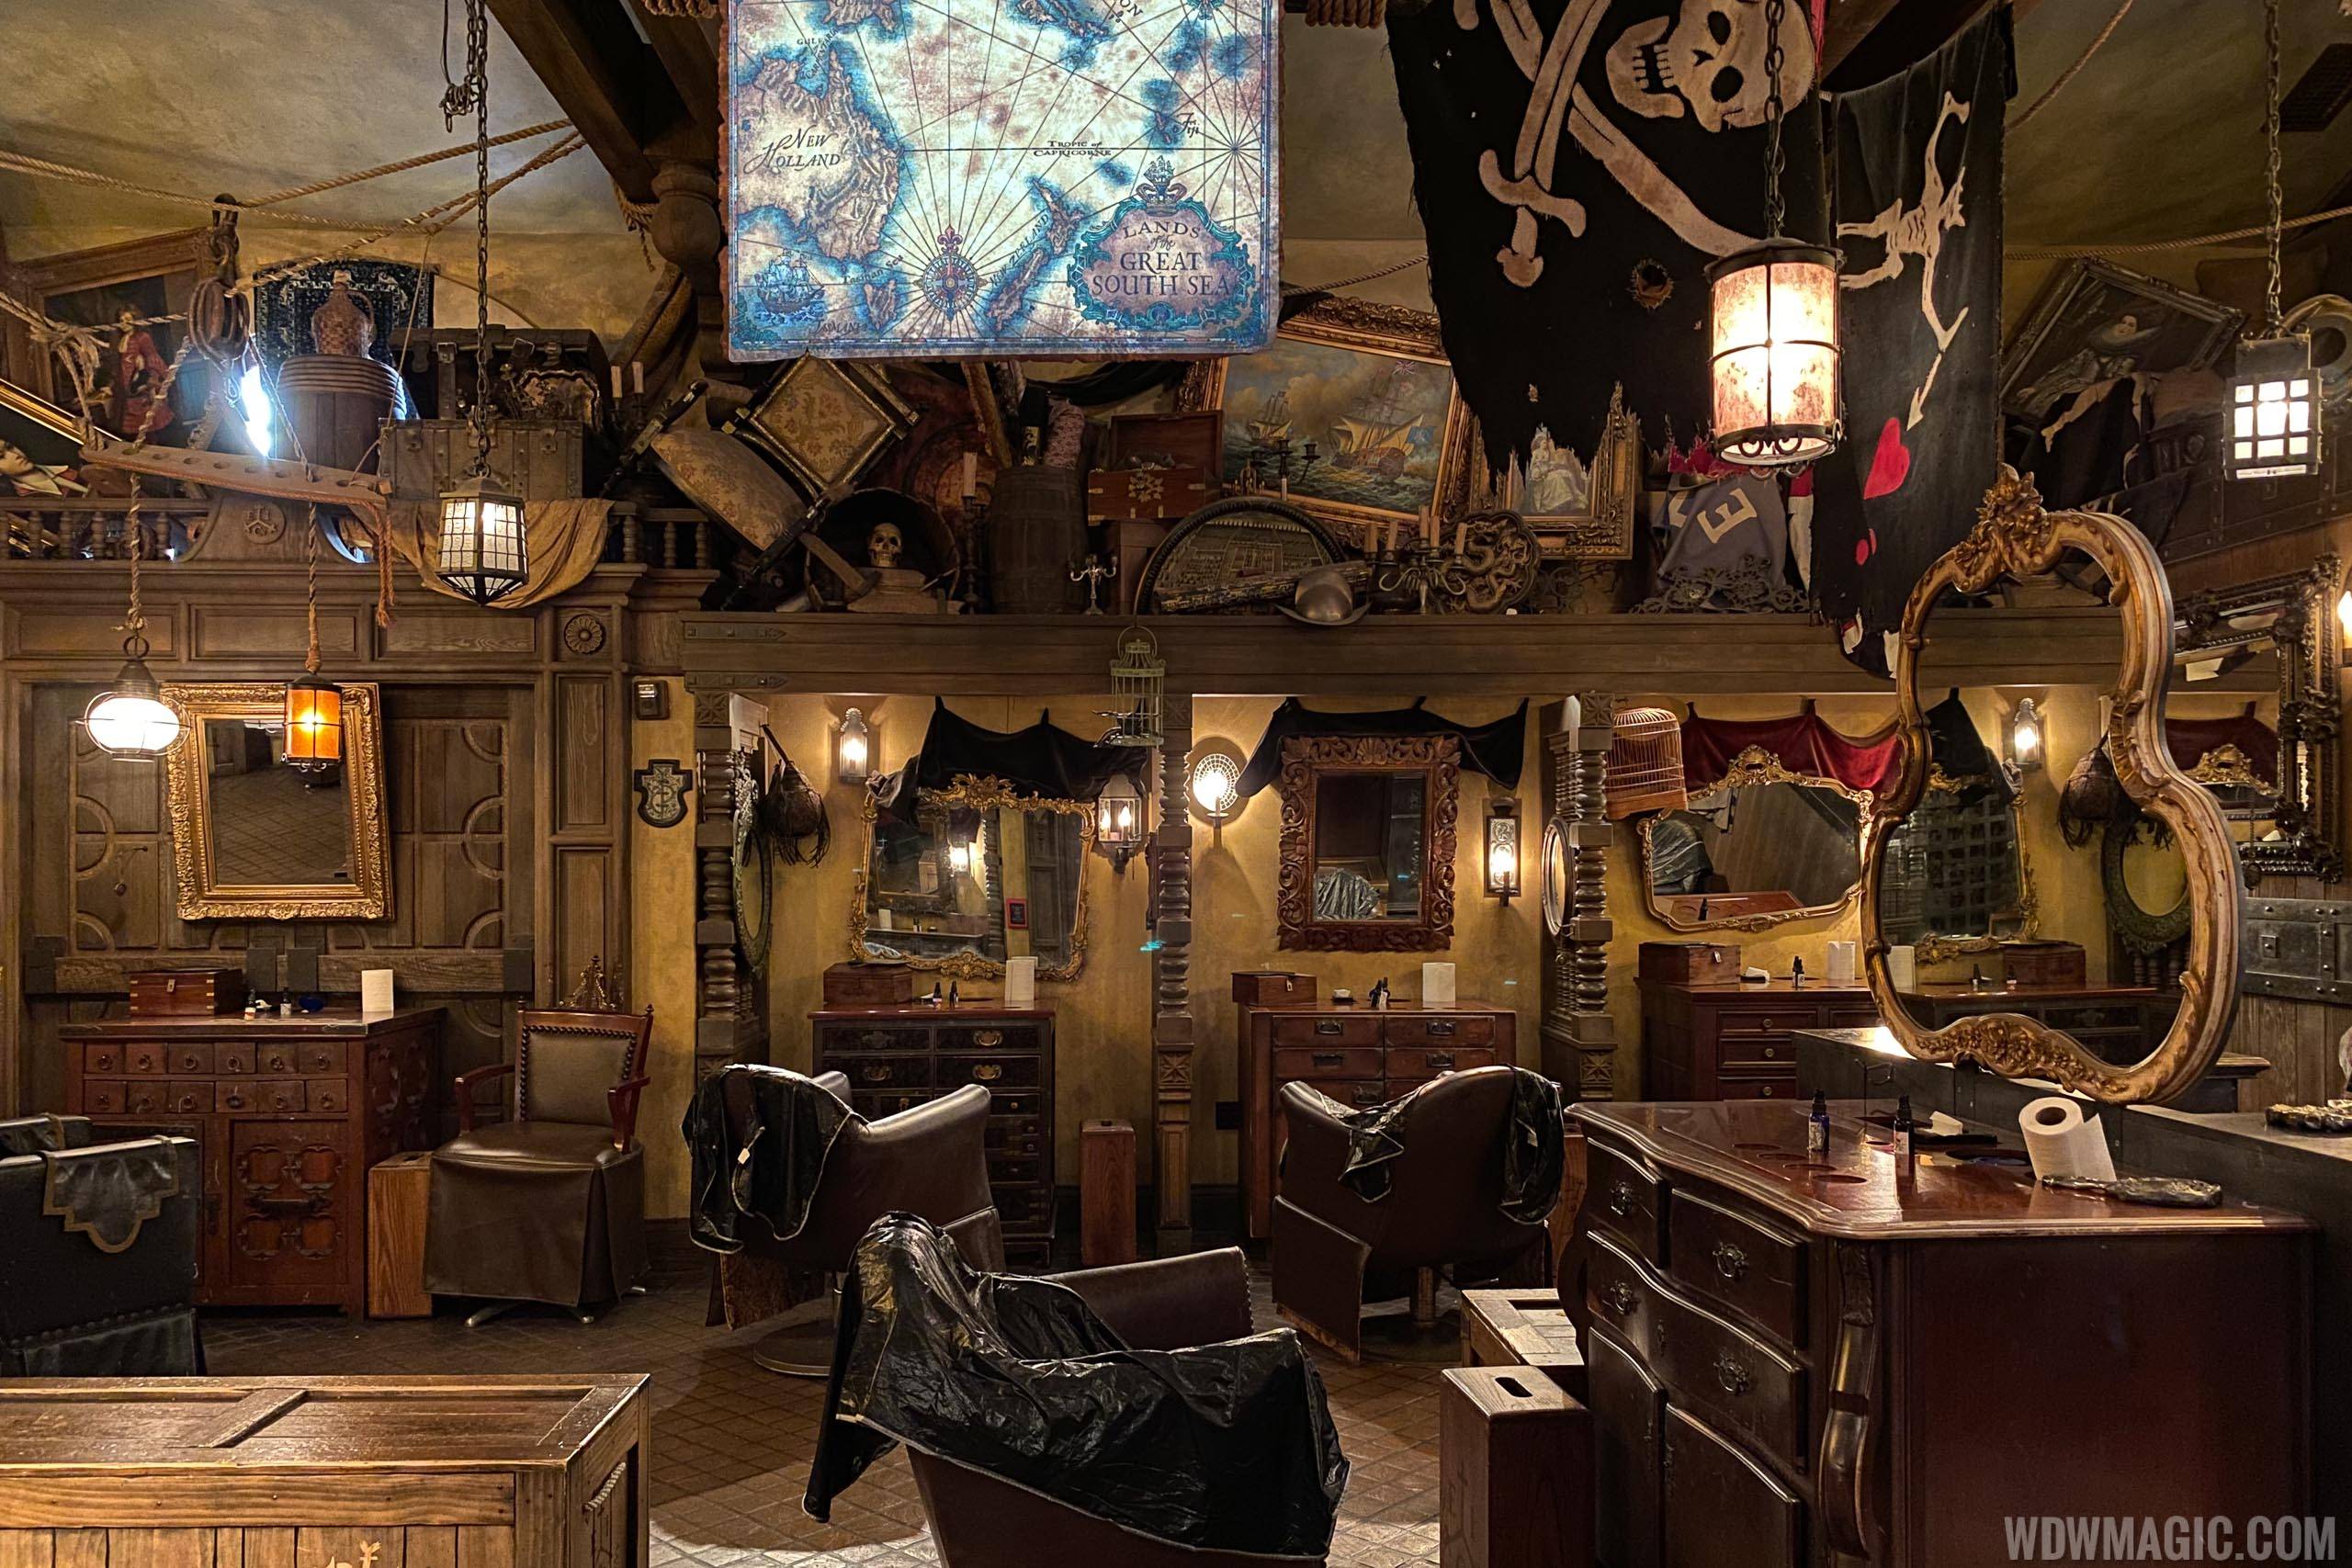 The Pirates League opens June 29 and booking begins May 11